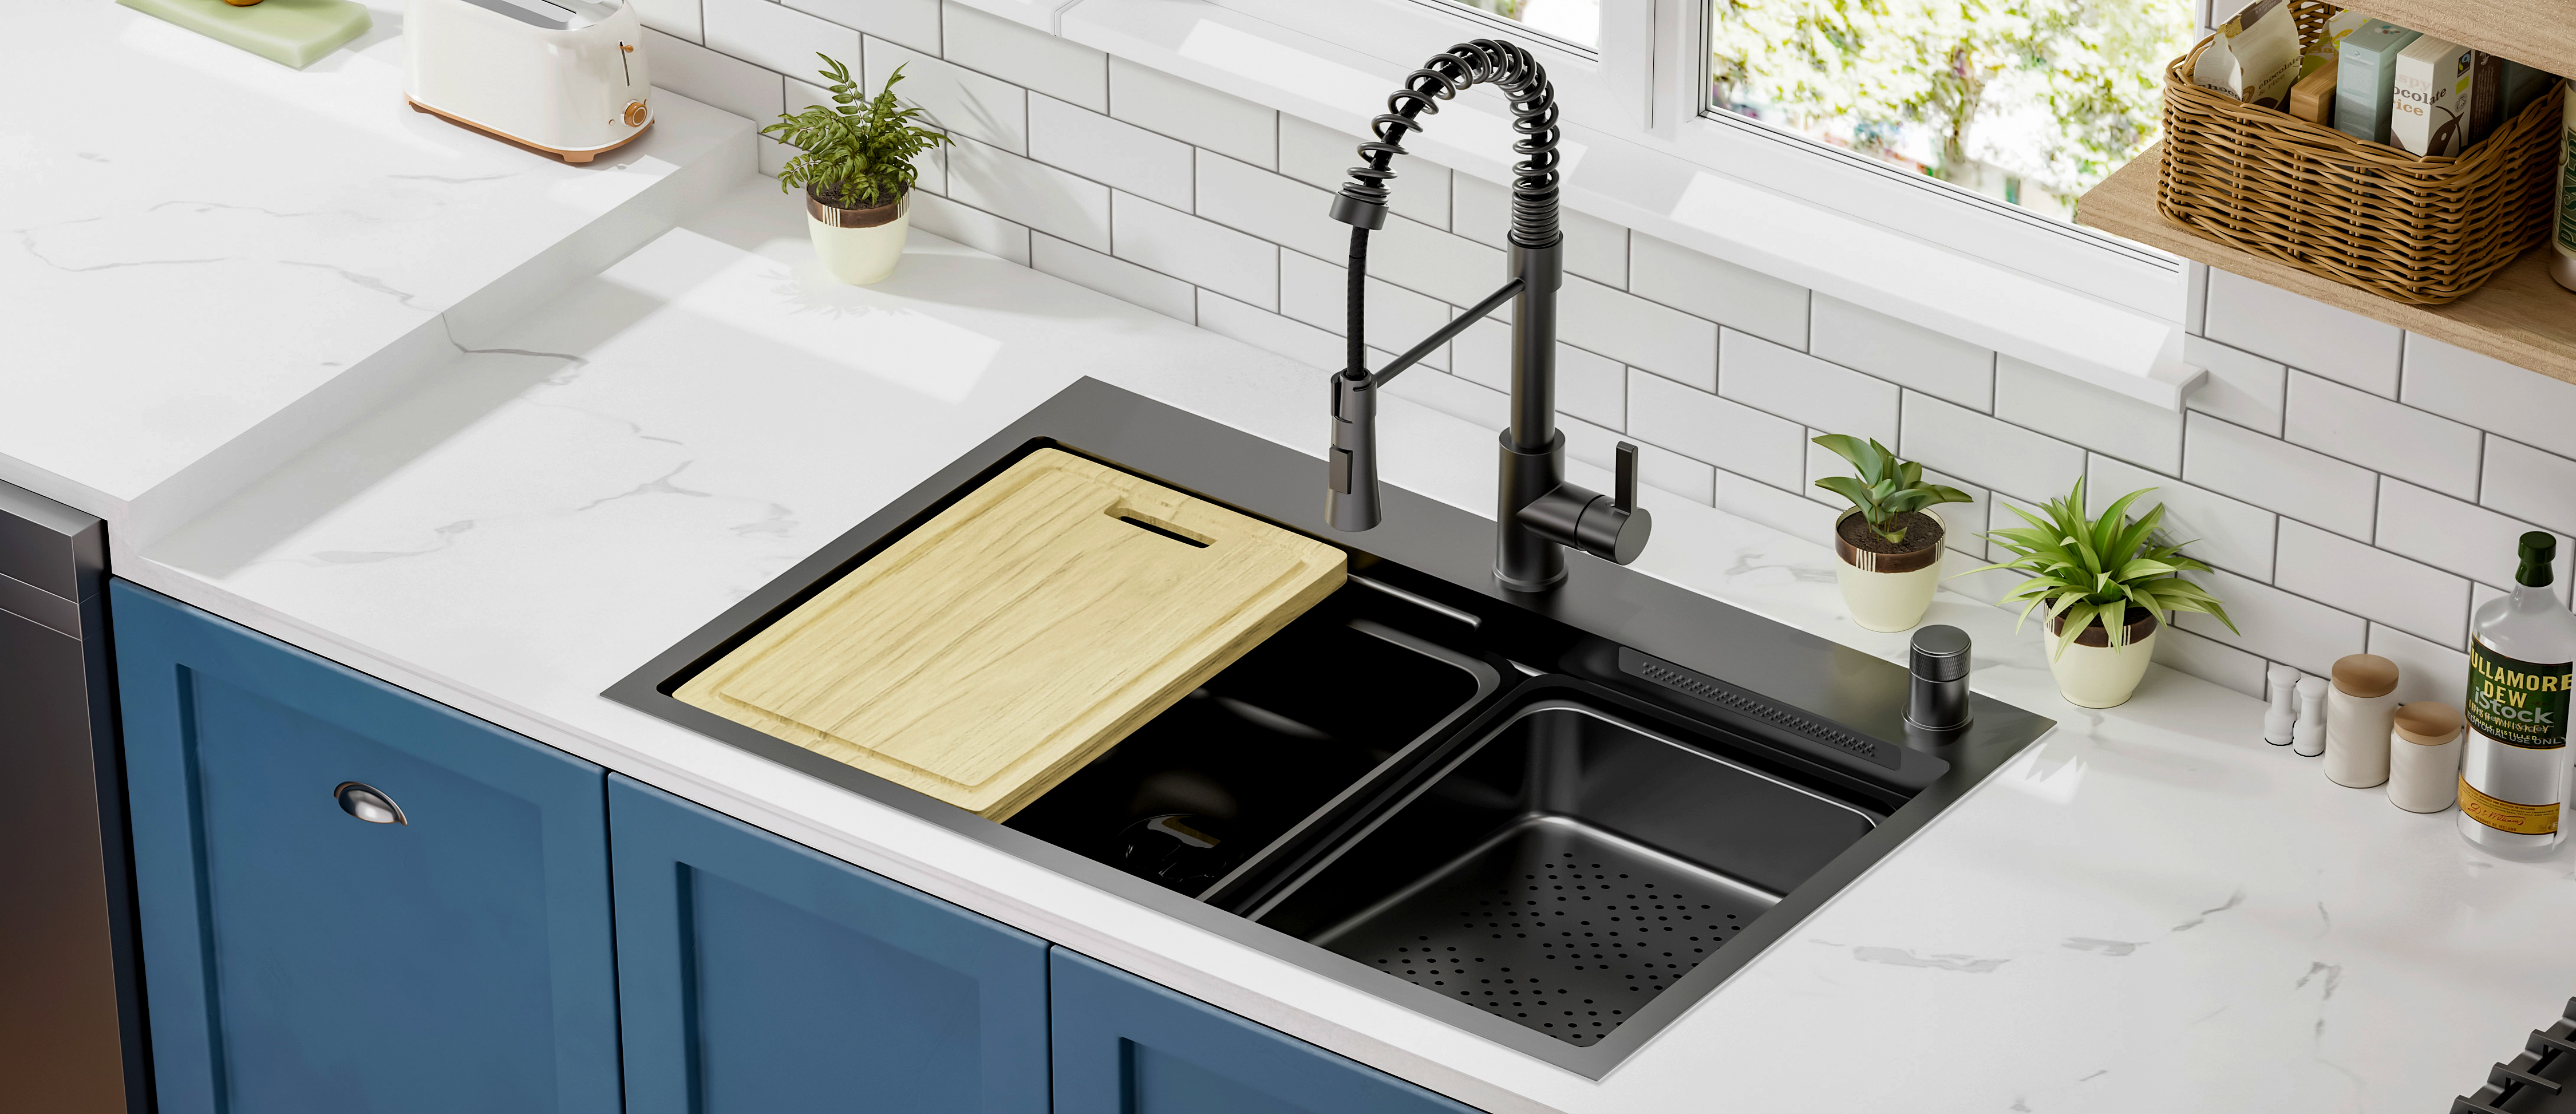 What are the different types of kitchen faucets available in the market?